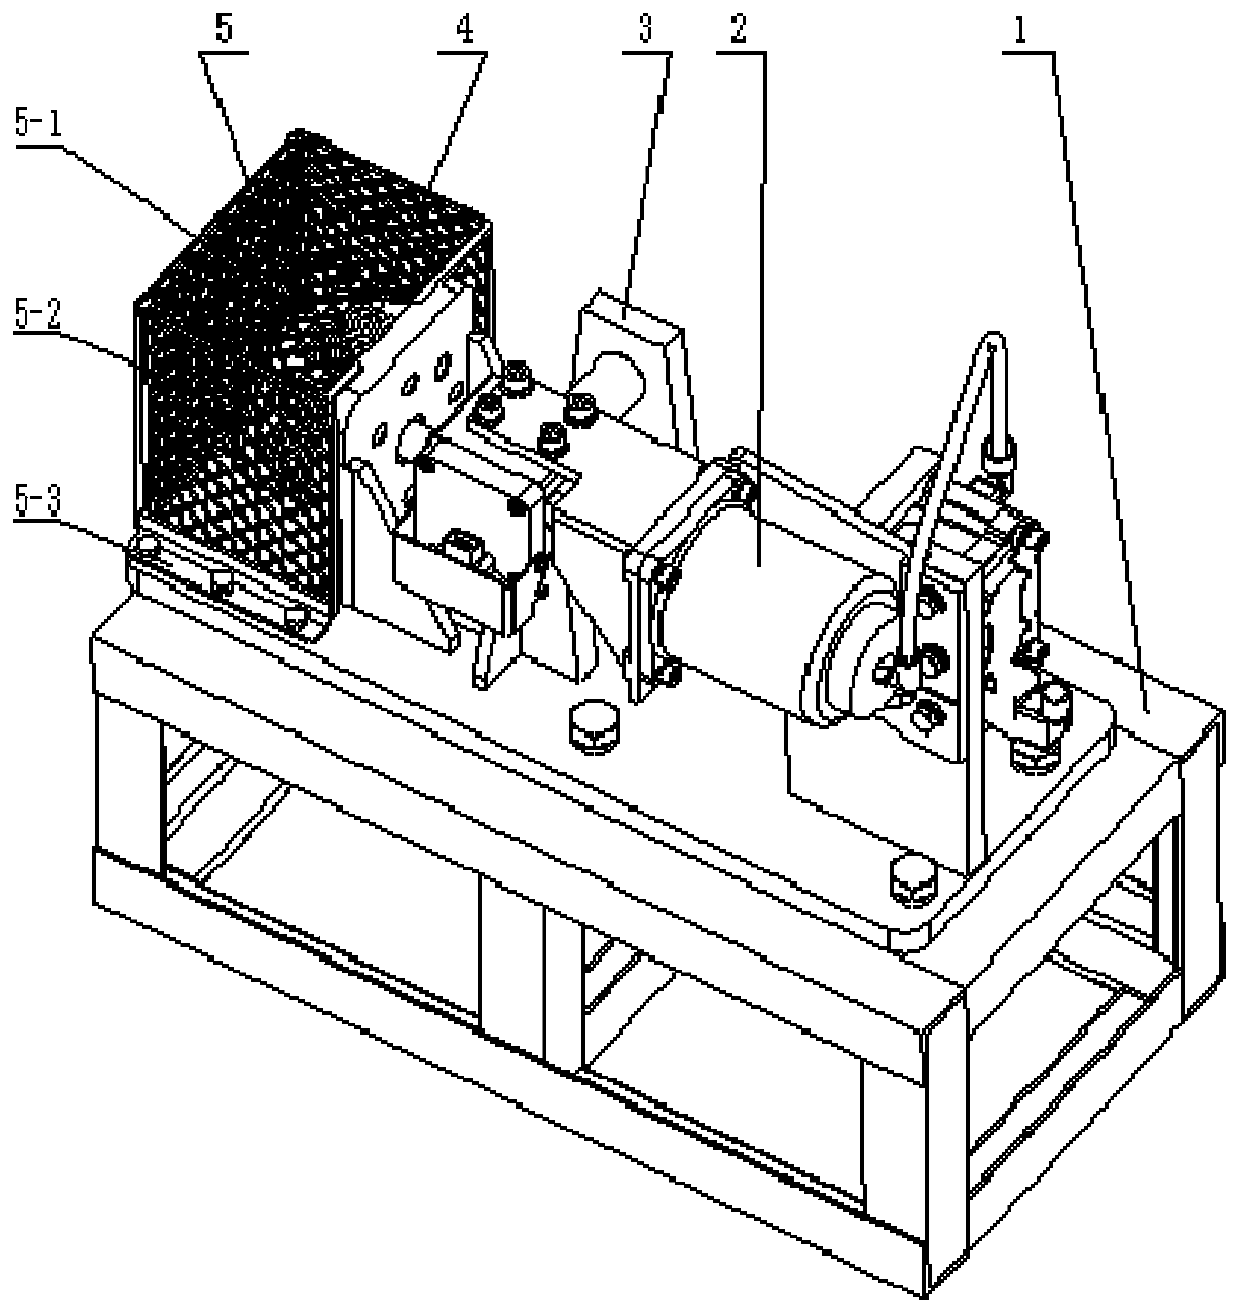 Belt-load testing device used by a clutch electronic control pneumatic separating mechanism